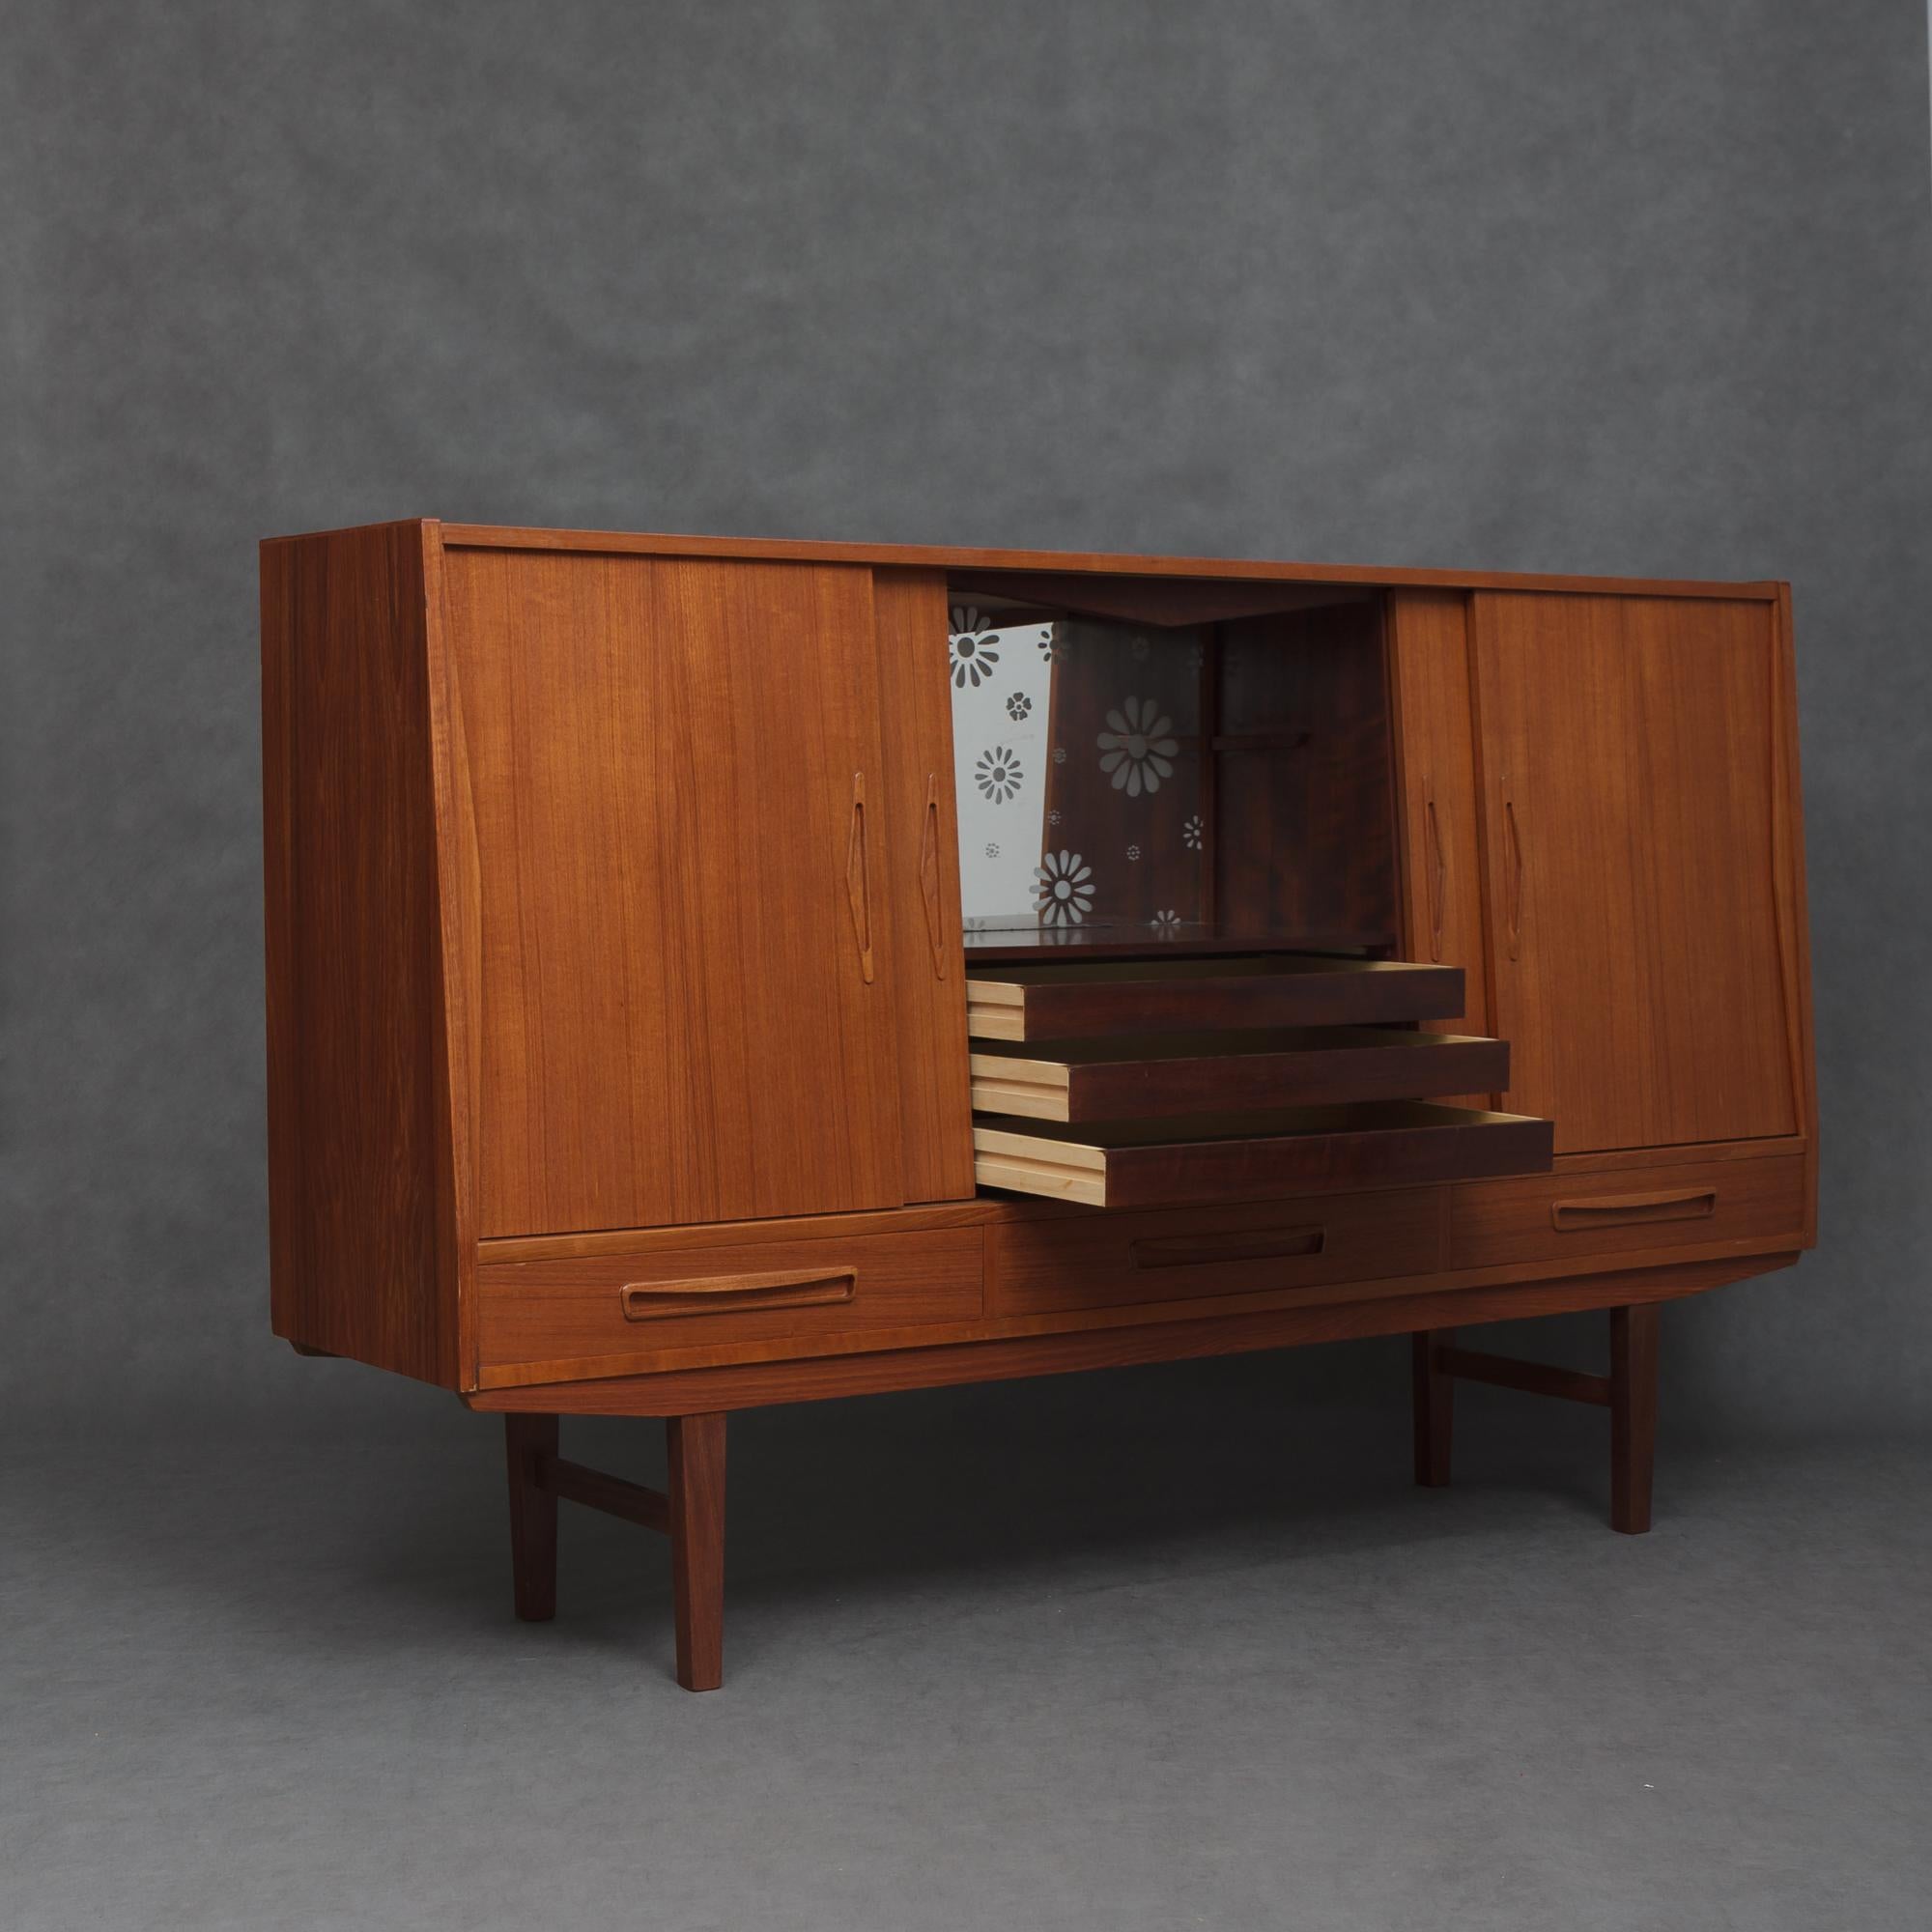 Mid-20th Century Danish Teak Highboard with a Lighted Bar from 1960s For Sale